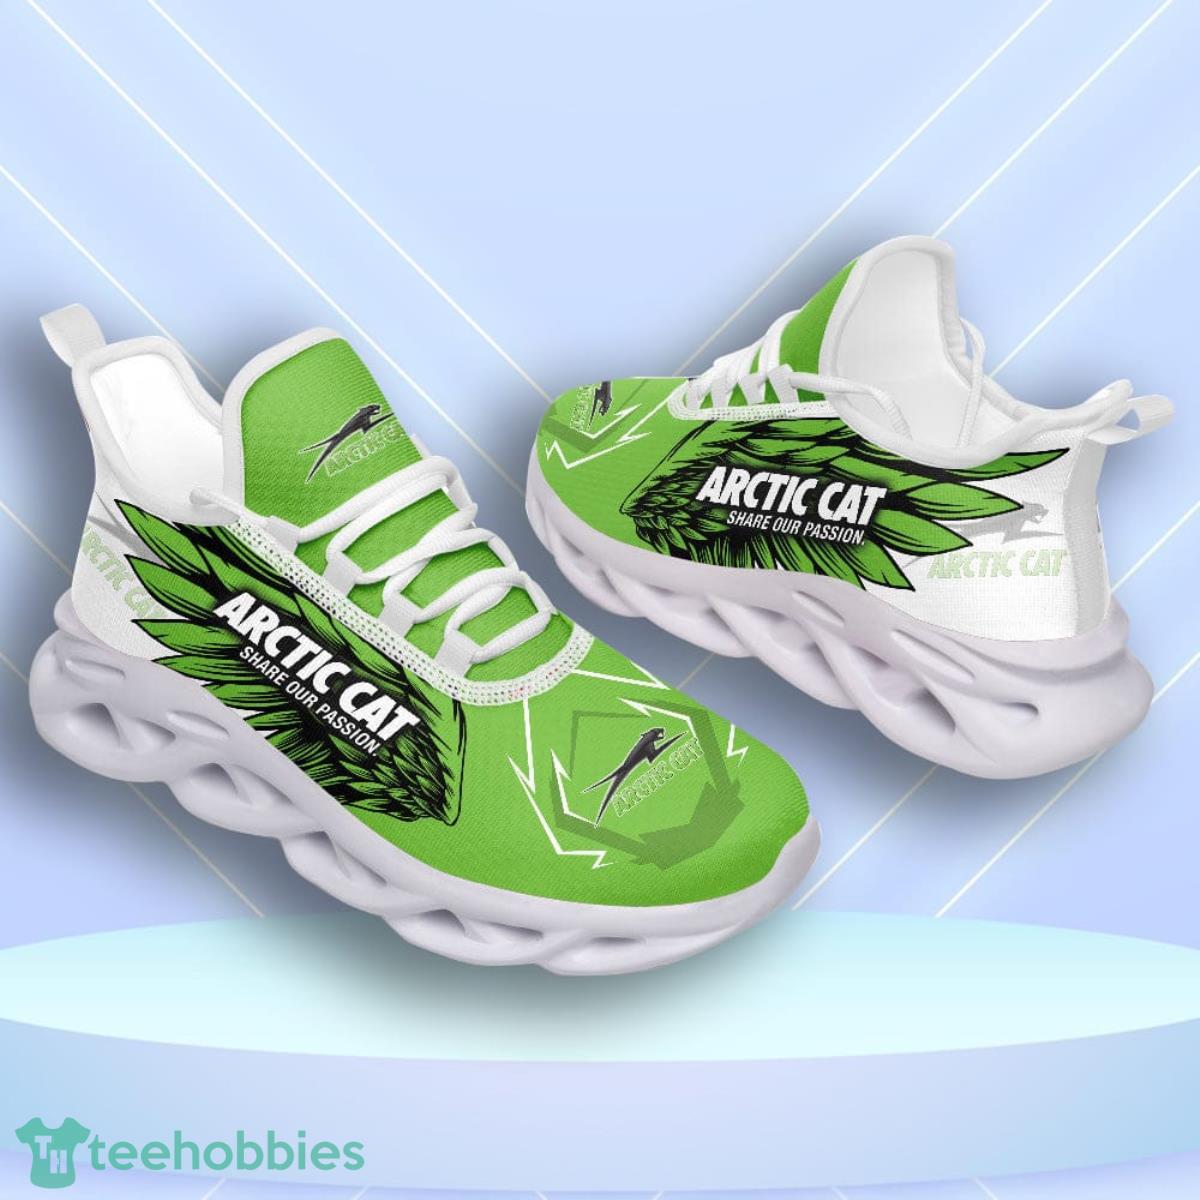 Arctic Cat Team Max Soul Shoes Running Sneakers Product Photo 1